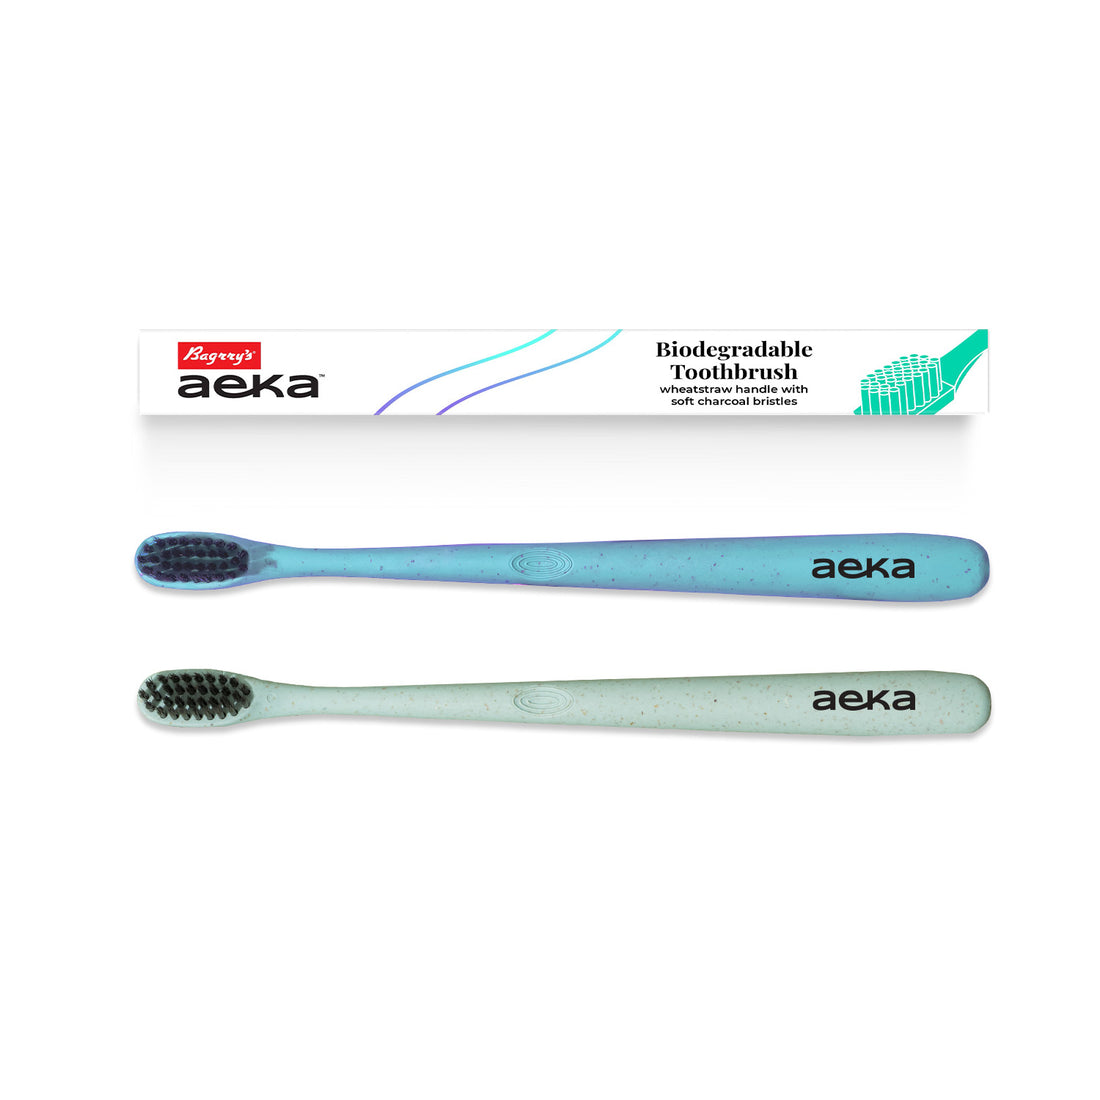 Aeka Biodegradable Toothbrush | Wheat Straw Handle - Pack of 2 (Green &amp; Blue)